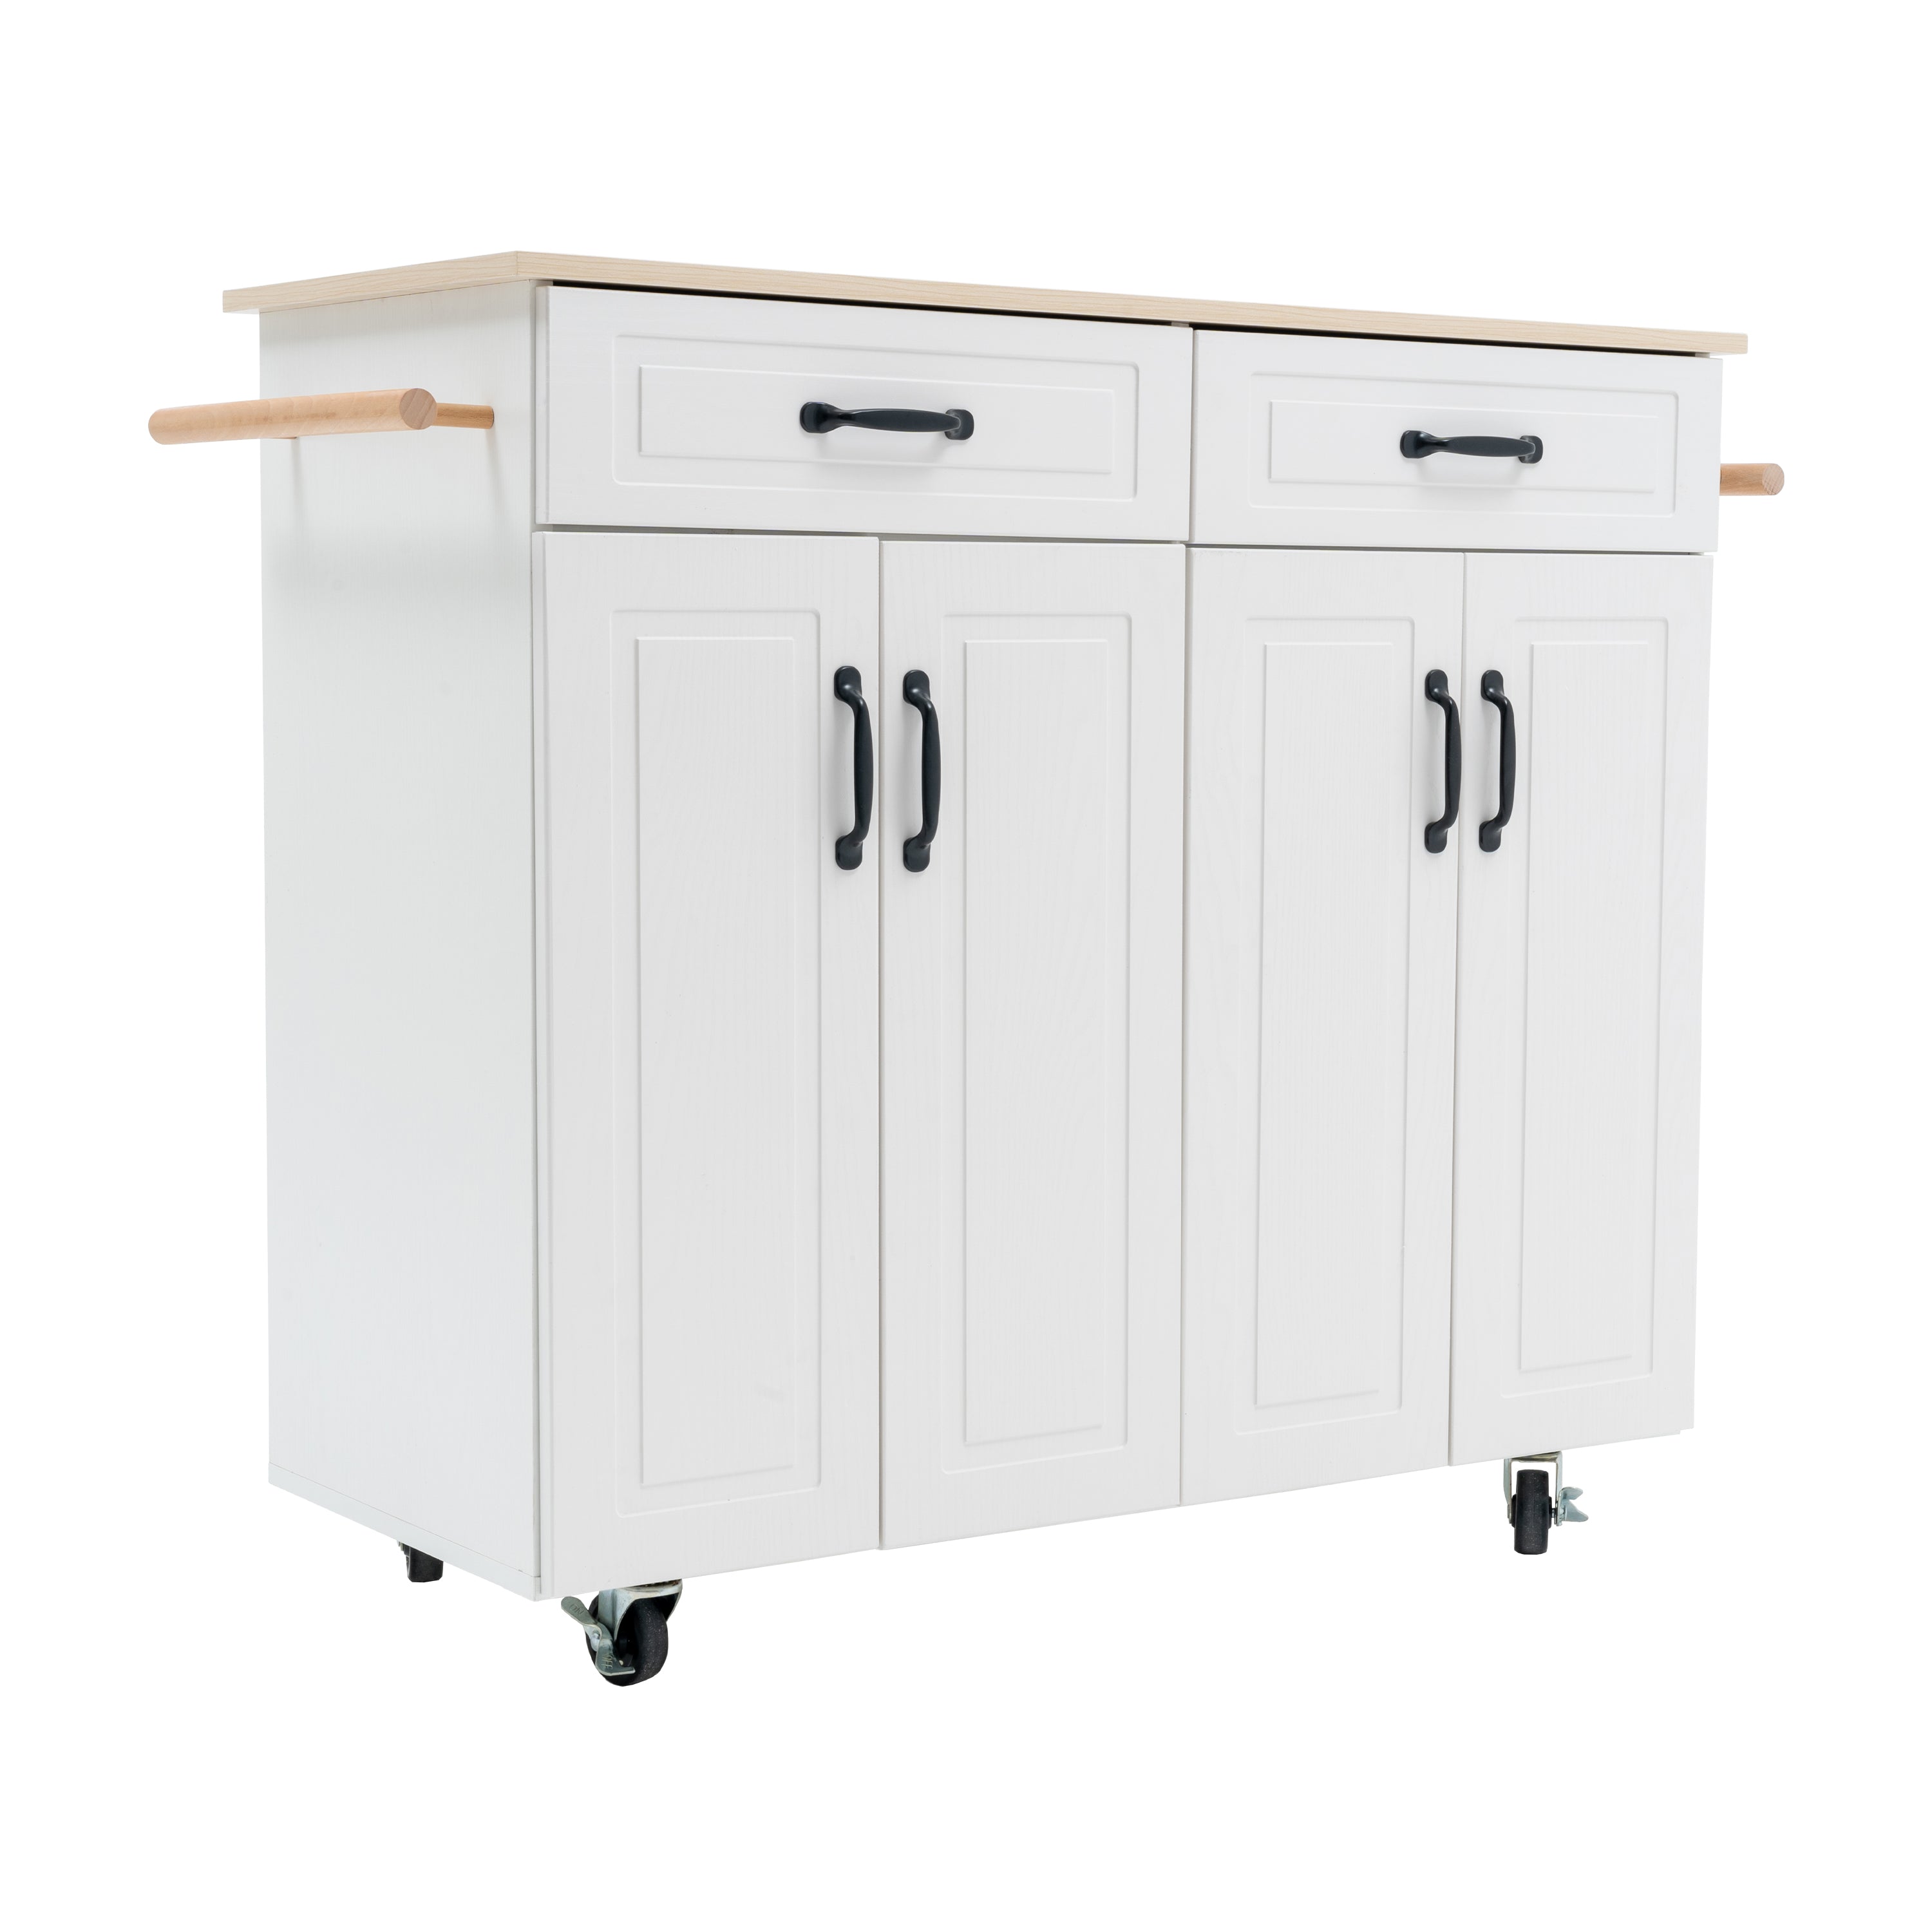 Prime Garden Kitchen Island Cart on Wheels with Drawer and Storage Shelves， White